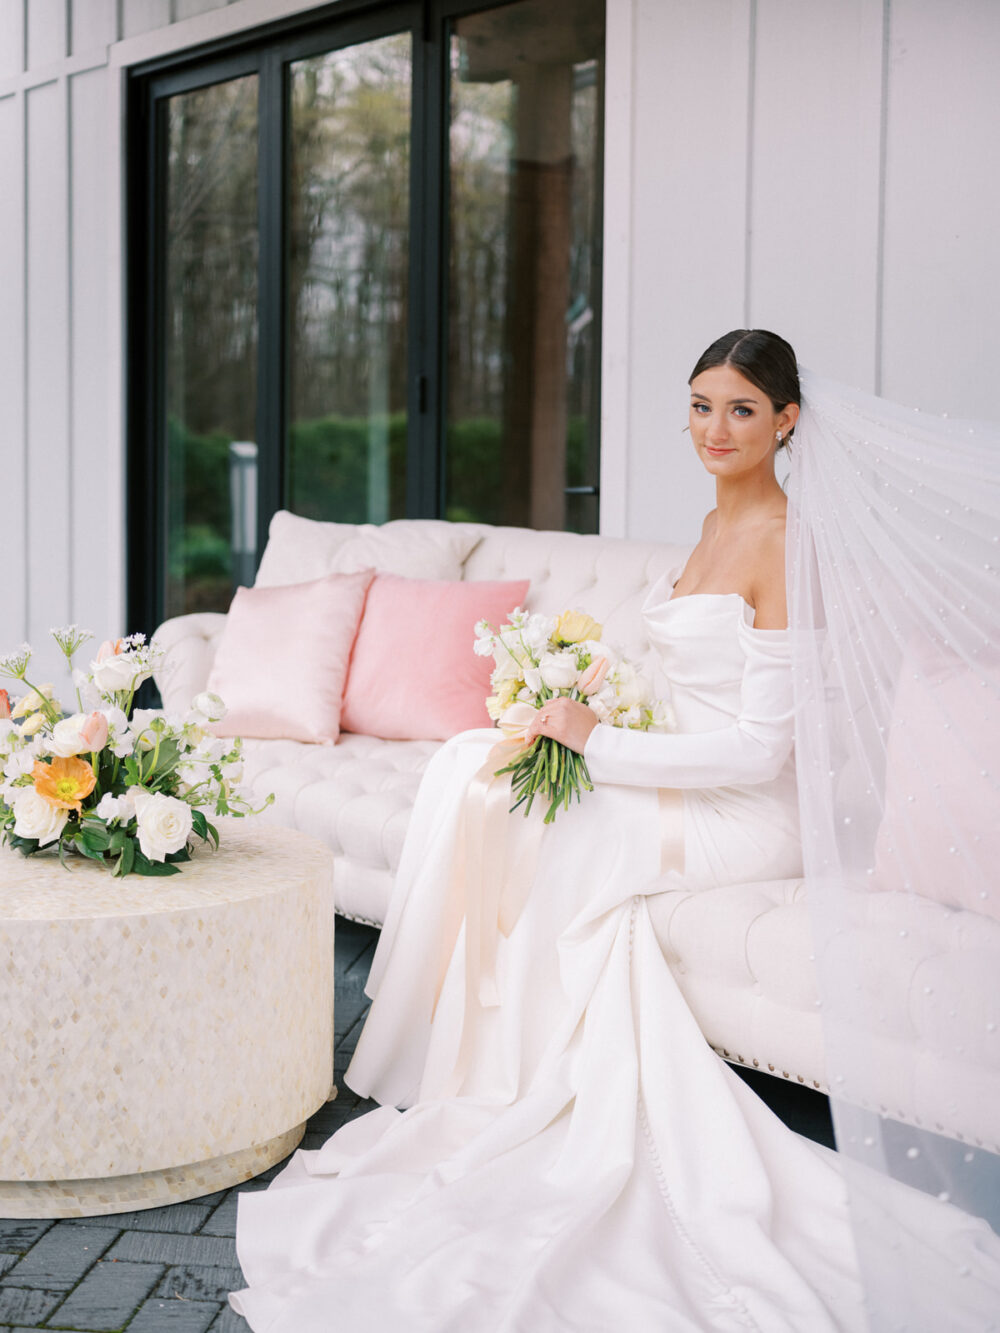 Soft romantic florals for a timeless Orlando wedding photographed by Juliana Kae